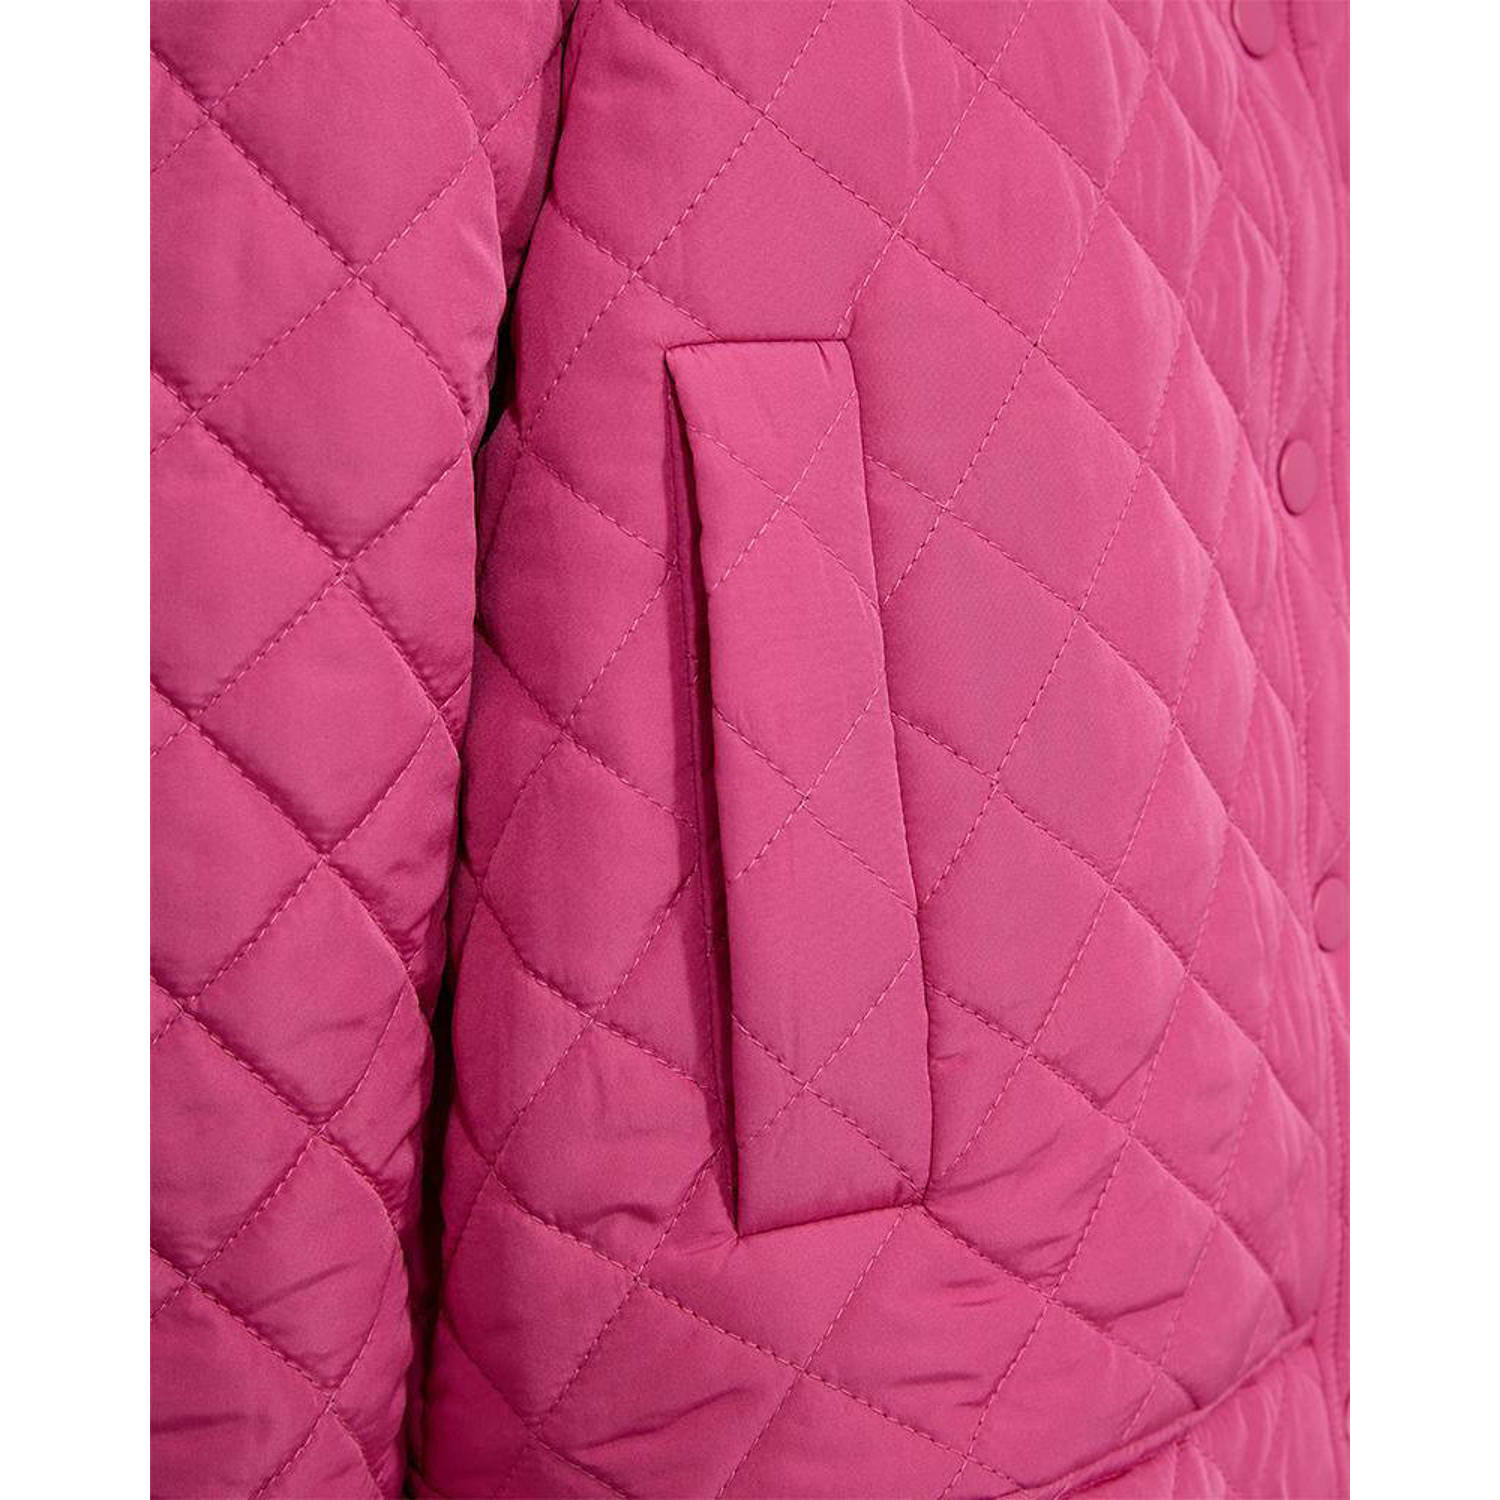 FREEQUENT quilted jasje roze